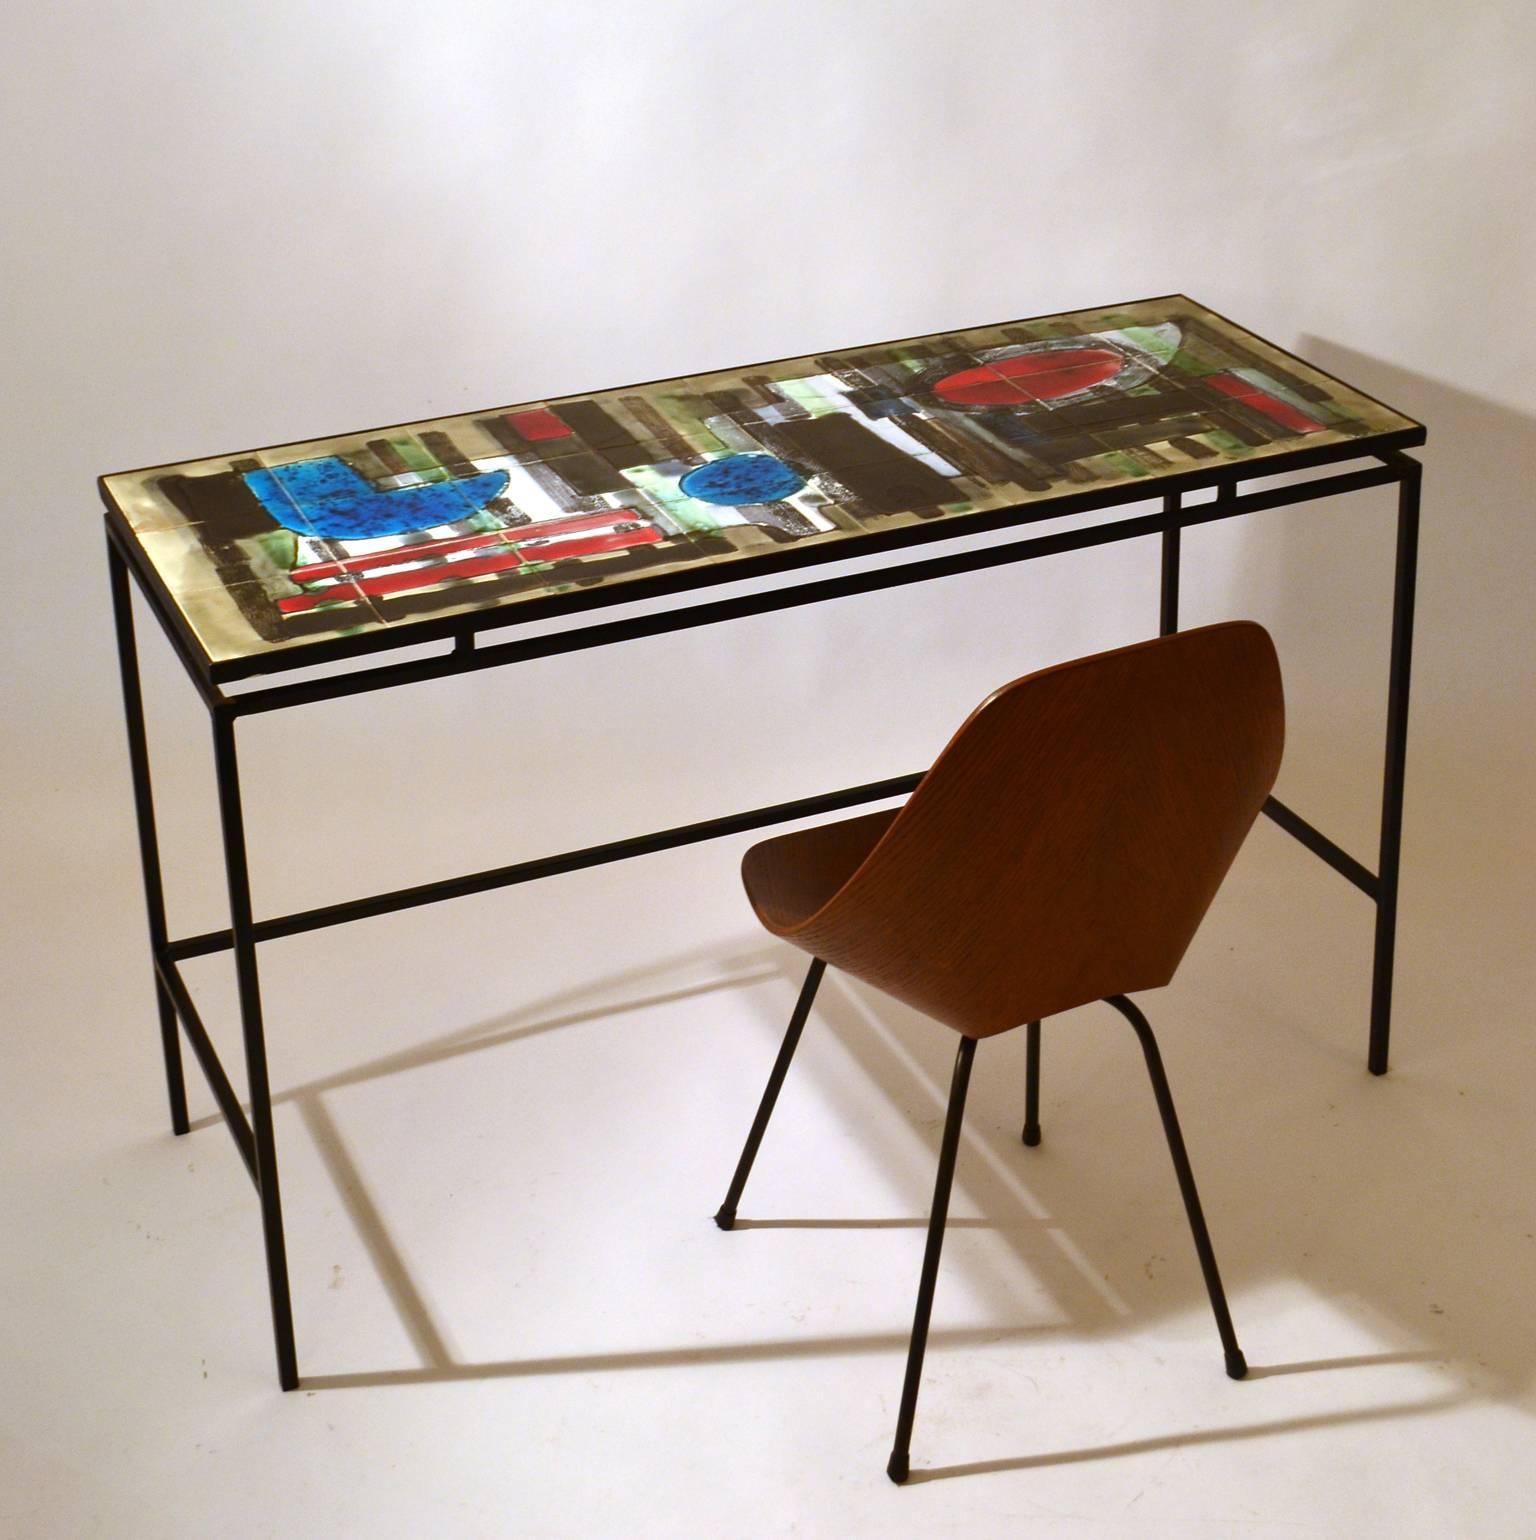 Mid-Century Modern 1960s Hand-Painted Ceramic Tile Console or Desk on Black Metal Frame by Belarti